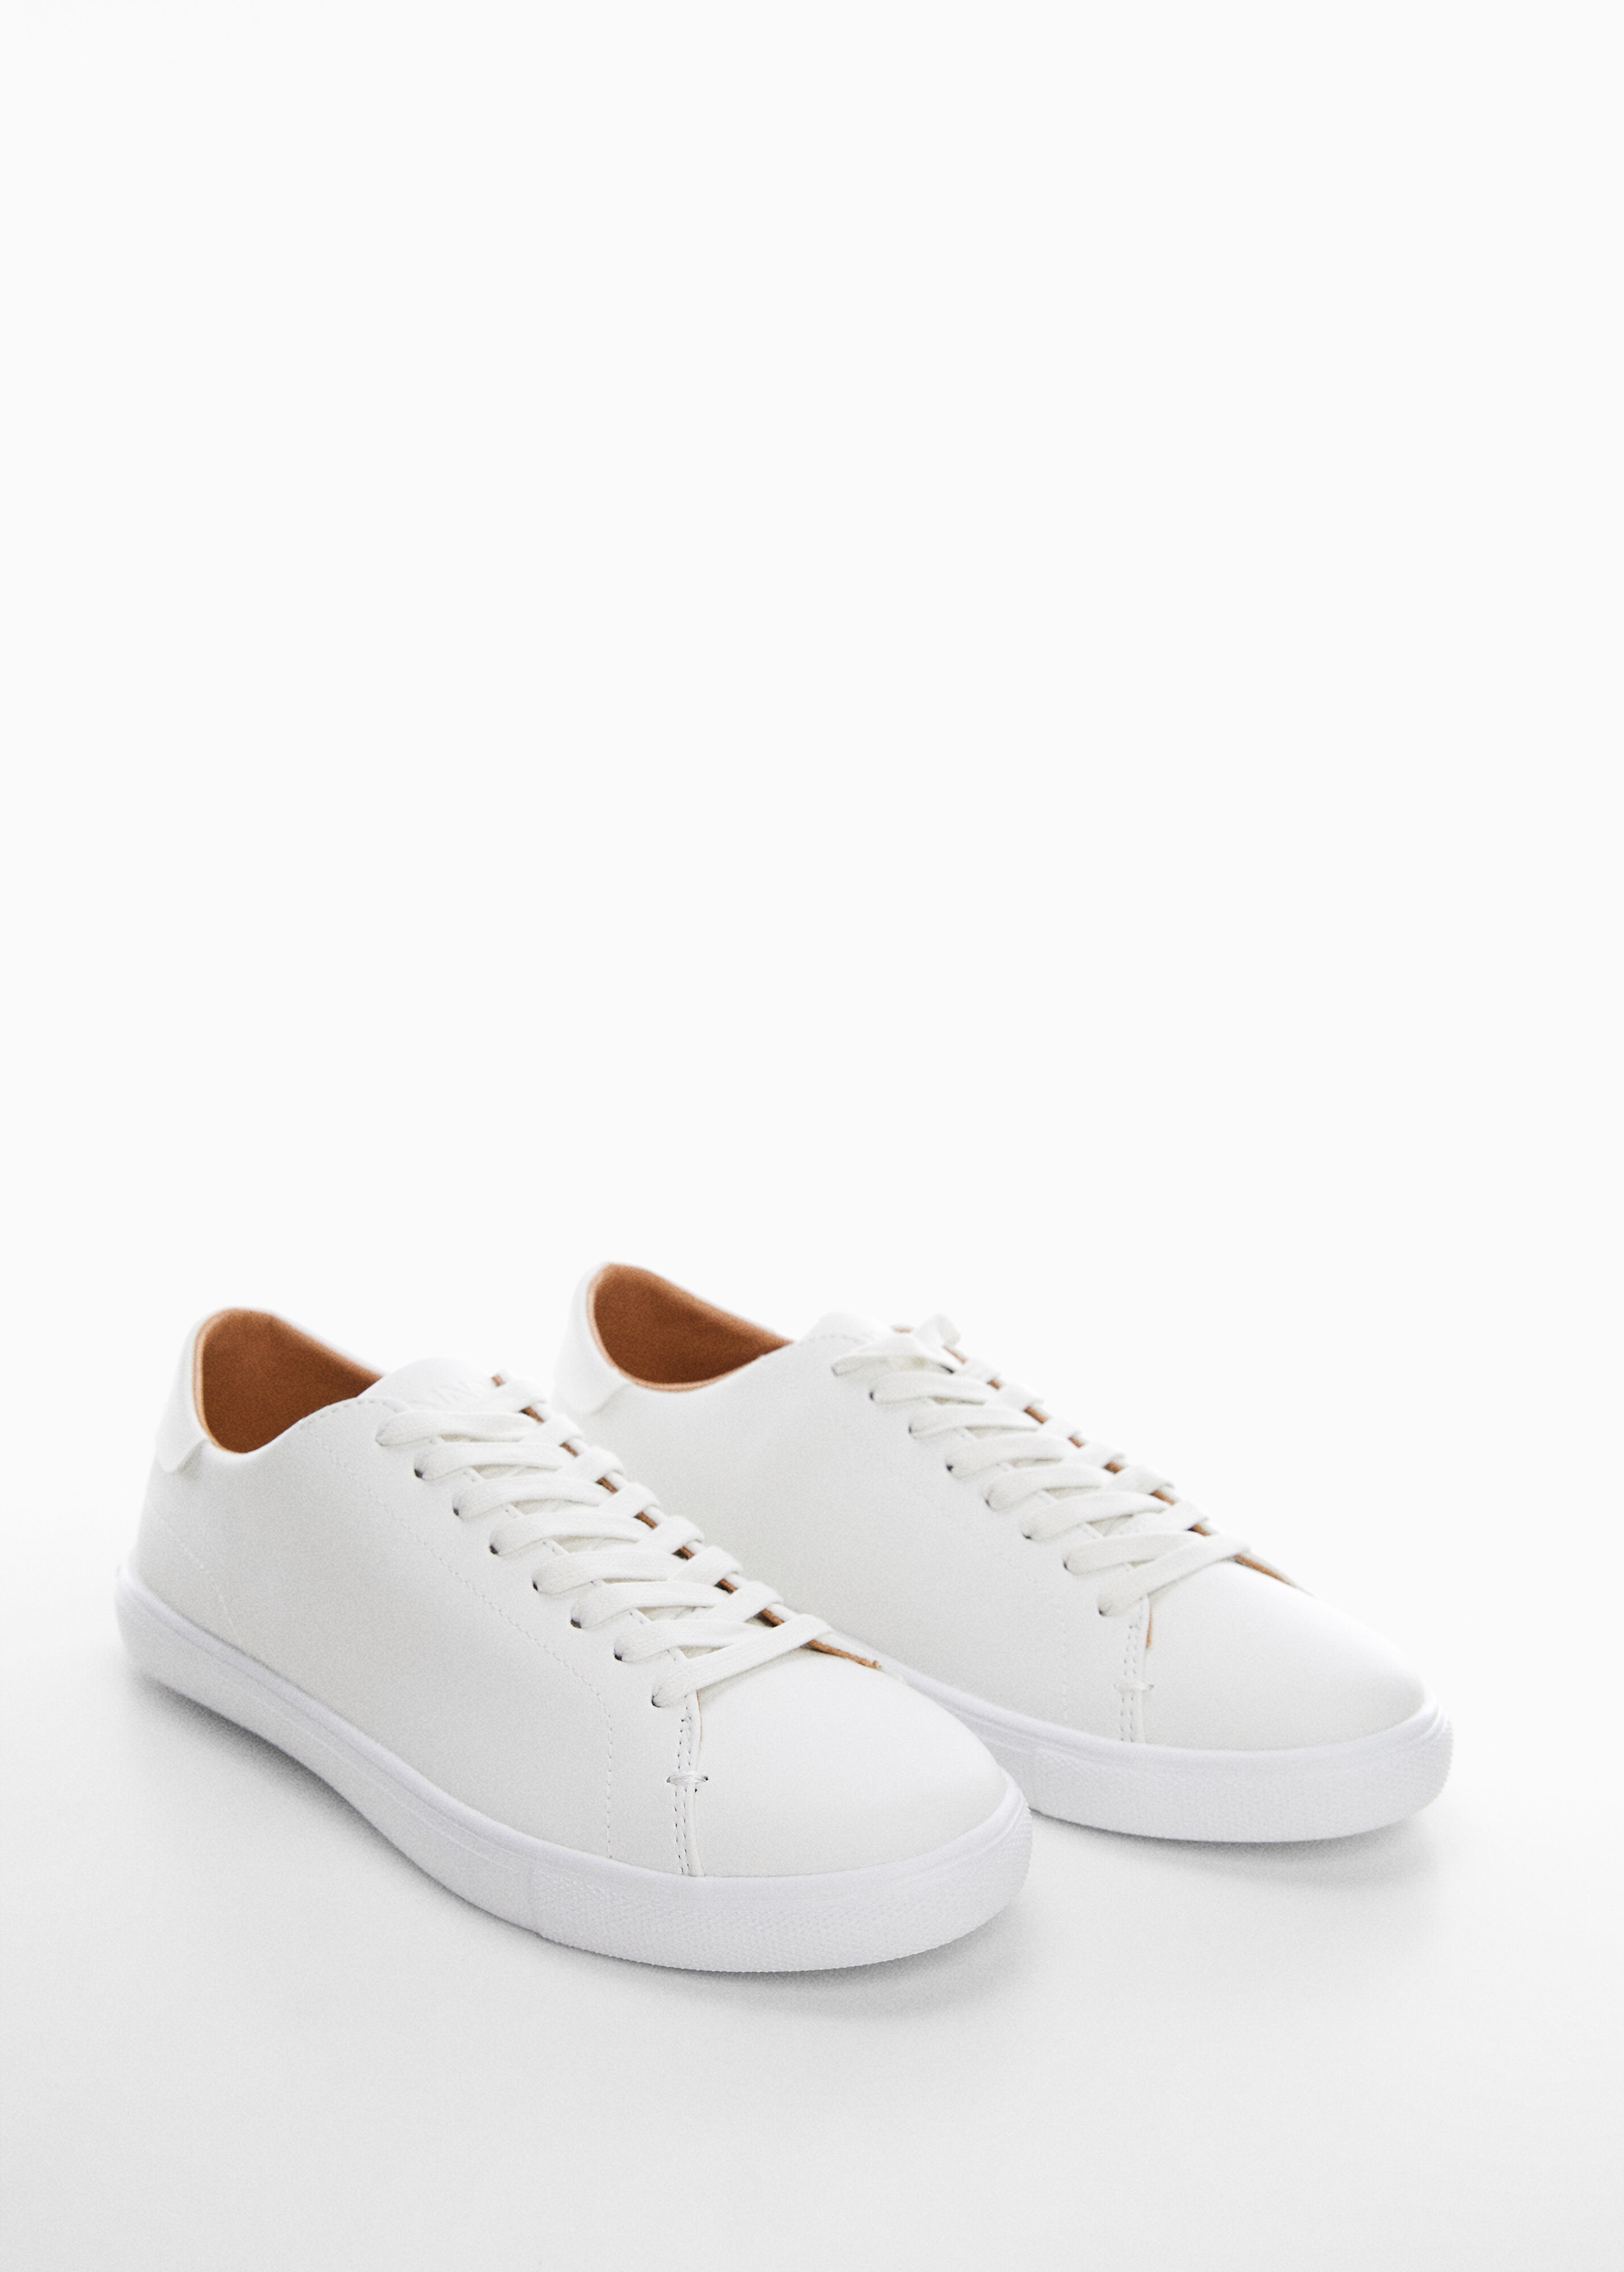 Noncolored leather sneakers - Medium plane